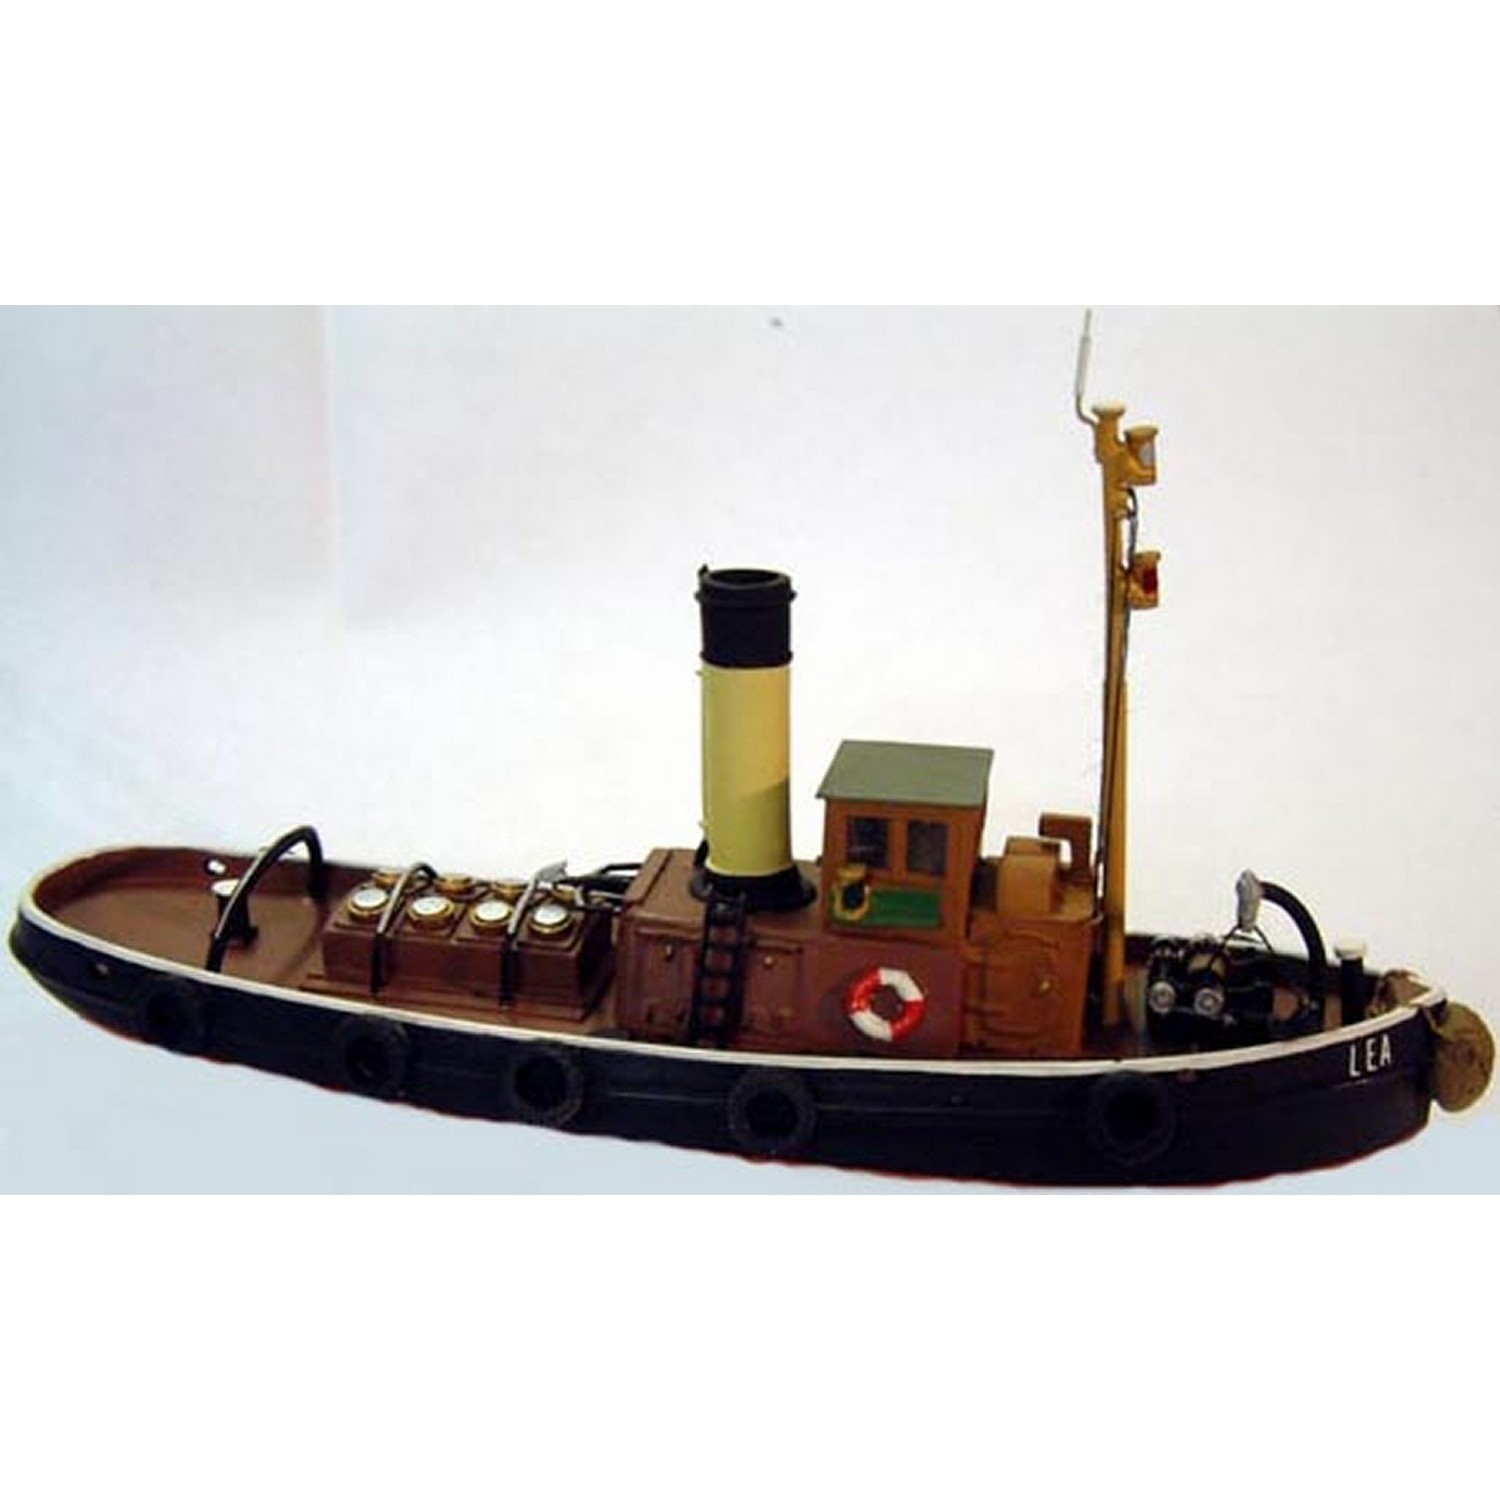 Langley Models 75ft Tid Class Tug Boat waterline N Scale UNPAINTED Kit NMB10a 